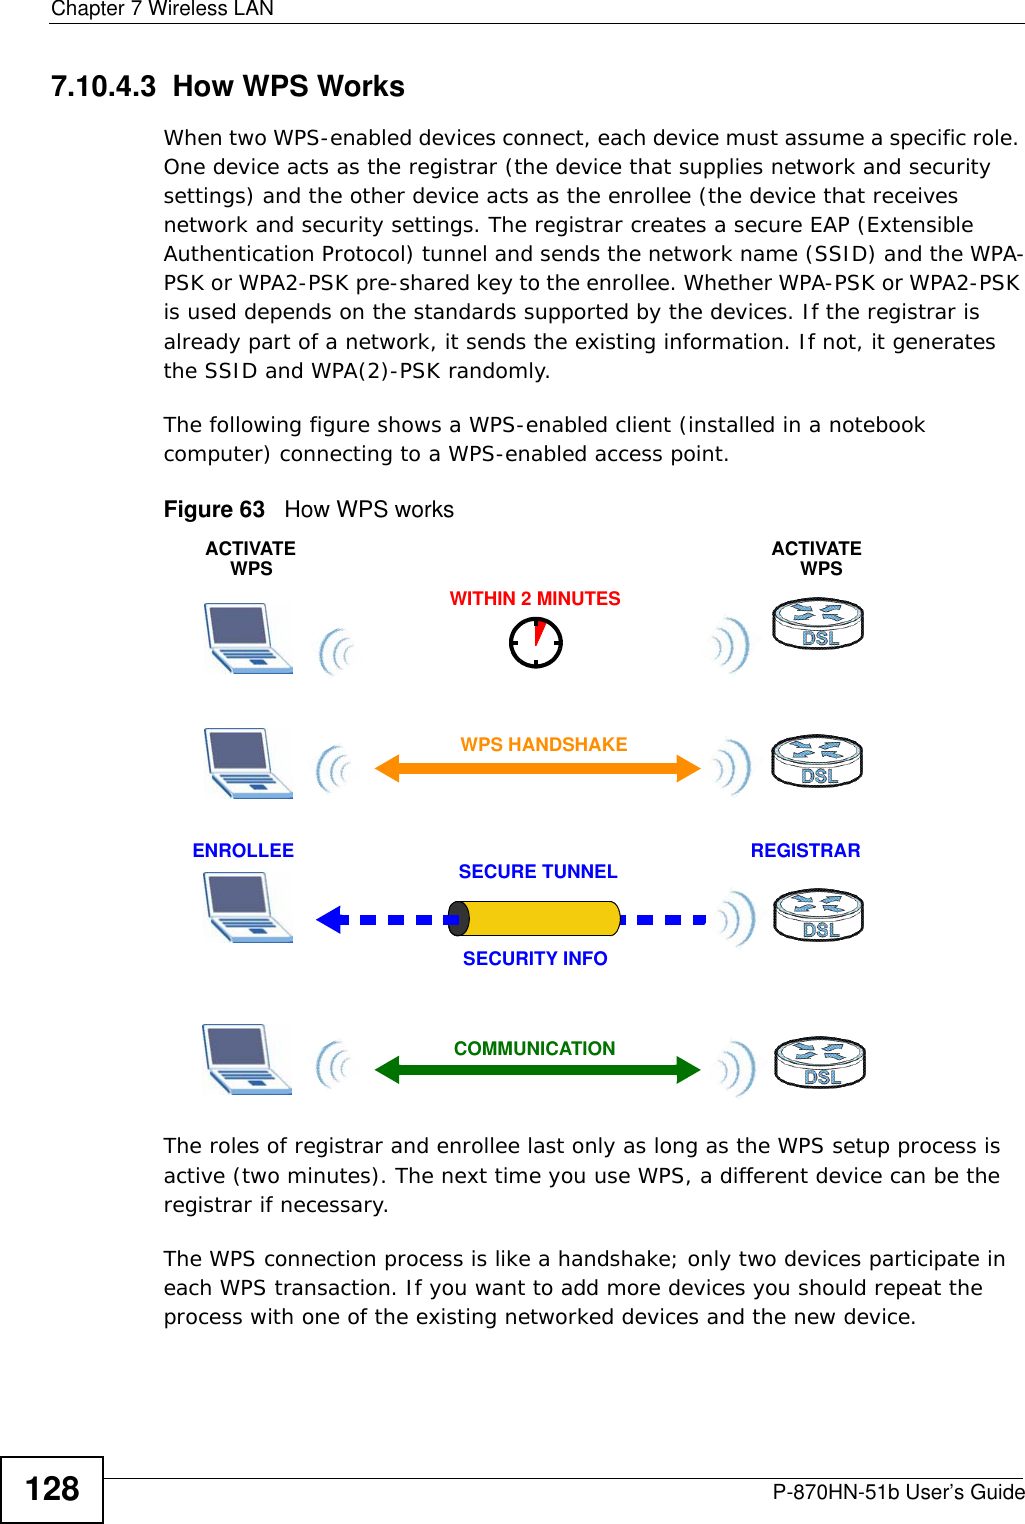 Chapter 7 Wireless LANP-870HN-51b User’s Guide1287.10.4.3  How WPS WorksWhen two WPS-enabled devices connect, each device must assume a specific role. One device acts as the registrar (the device that supplies network and security settings) and the other device acts as the enrollee (the device that receives network and security settings. The registrar creates a secure EAP (Extensible Authentication Protocol) tunnel and sends the network name (SSID) and the WPA-PSK or WPA2-PSK pre-shared key to the enrollee. Whether WPA-PSK or WPA2-PSK is used depends on the standards supported by the devices. If the registrar is already part of a network, it sends the existing information. If not, it generates the SSID and WPA(2)-PSK randomly.The following figure shows a WPS-enabled client (installed in a notebook computer) connecting to a WPS-enabled access point.Figure 63   How WPS worksThe roles of registrar and enrollee last only as long as the WPS setup process is active (two minutes). The next time you use WPS, a different device can be the registrar if necessary.The WPS connection process is like a handshake; only two devices participate in each WPS transaction. If you want to add more devices you should repeat the process with one of the existing networked devices and the new device.SECURE TUNNELSECURITY INFOWITHIN 2 MINUTESCOMMUNICATIONACTIVATEWPSACTIVATEWPSWPS HANDSHAKEREGISTRARENROLLEE